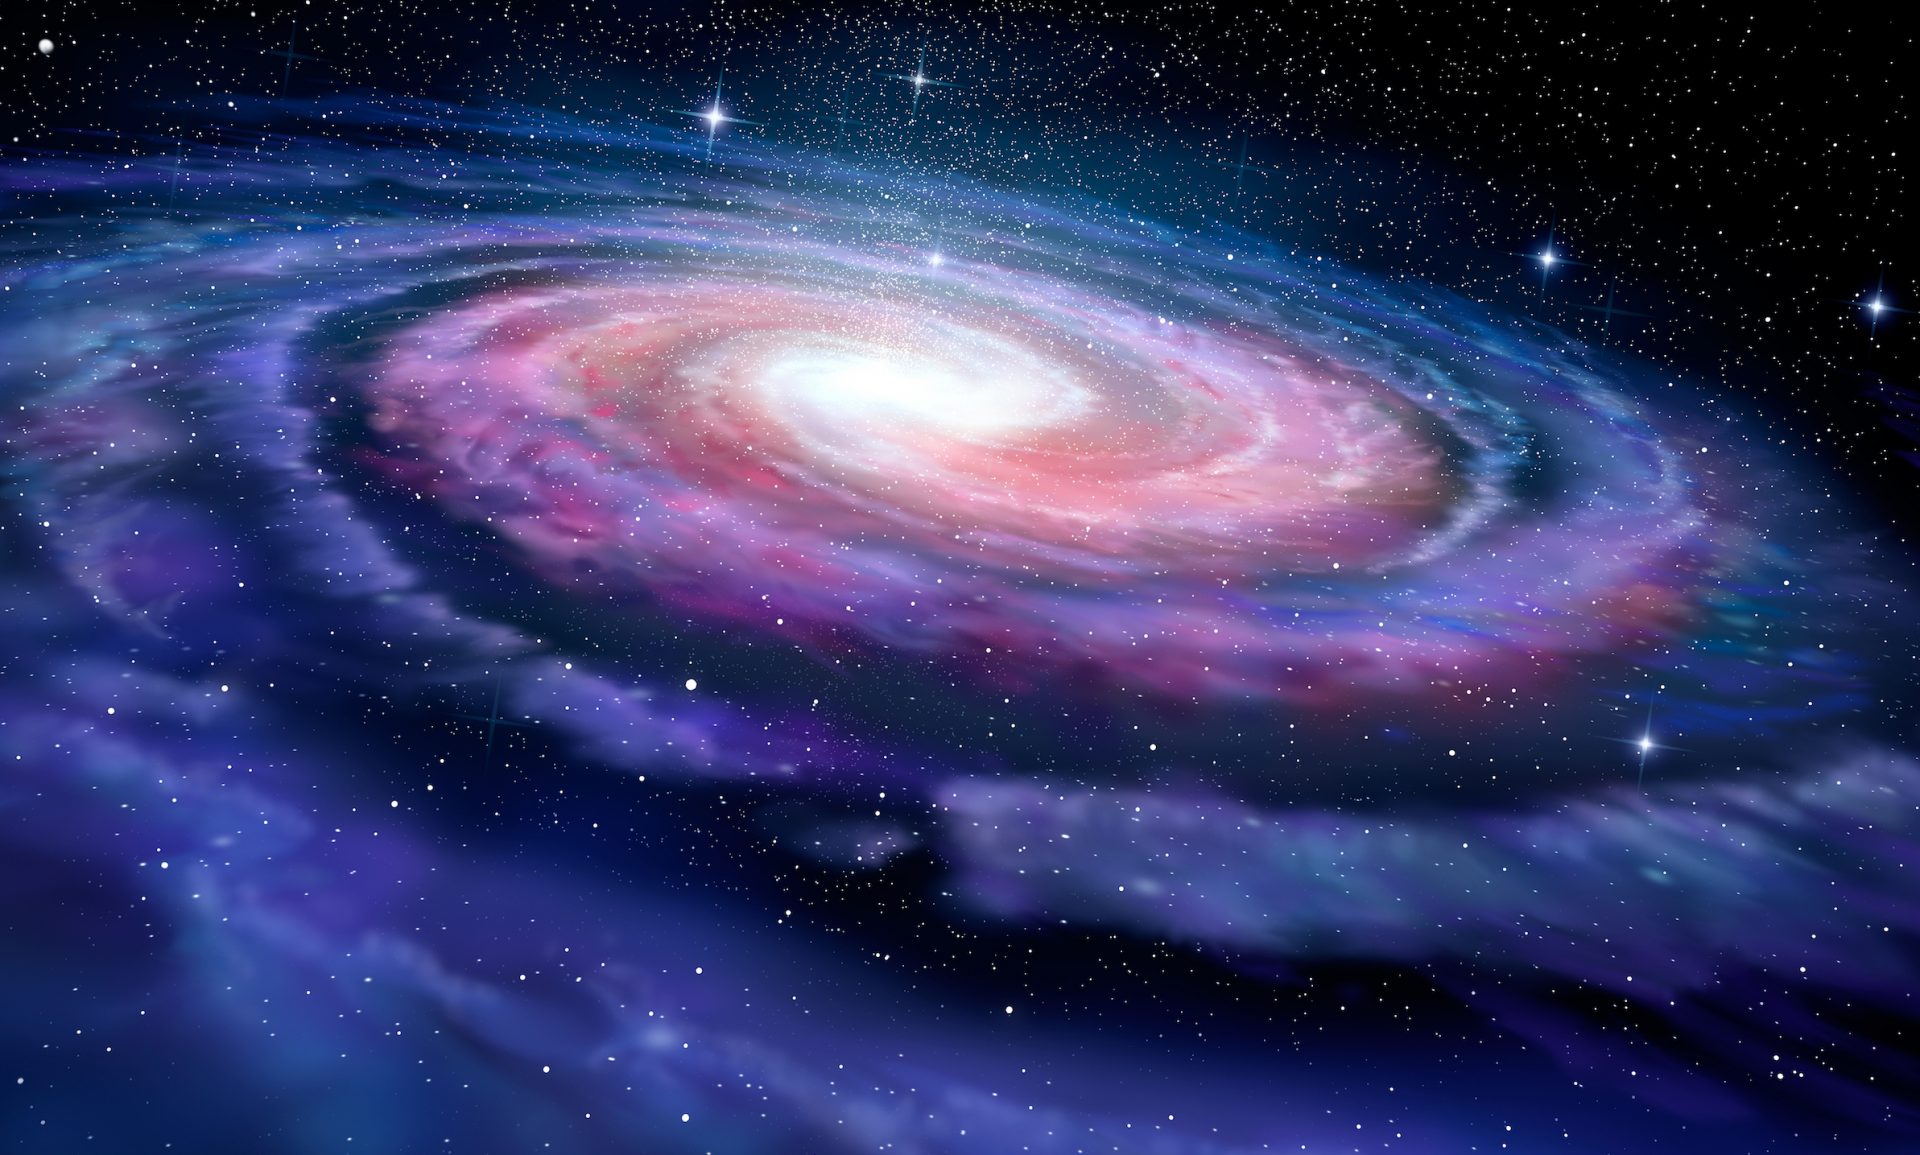 How lengthy is a galactic year?